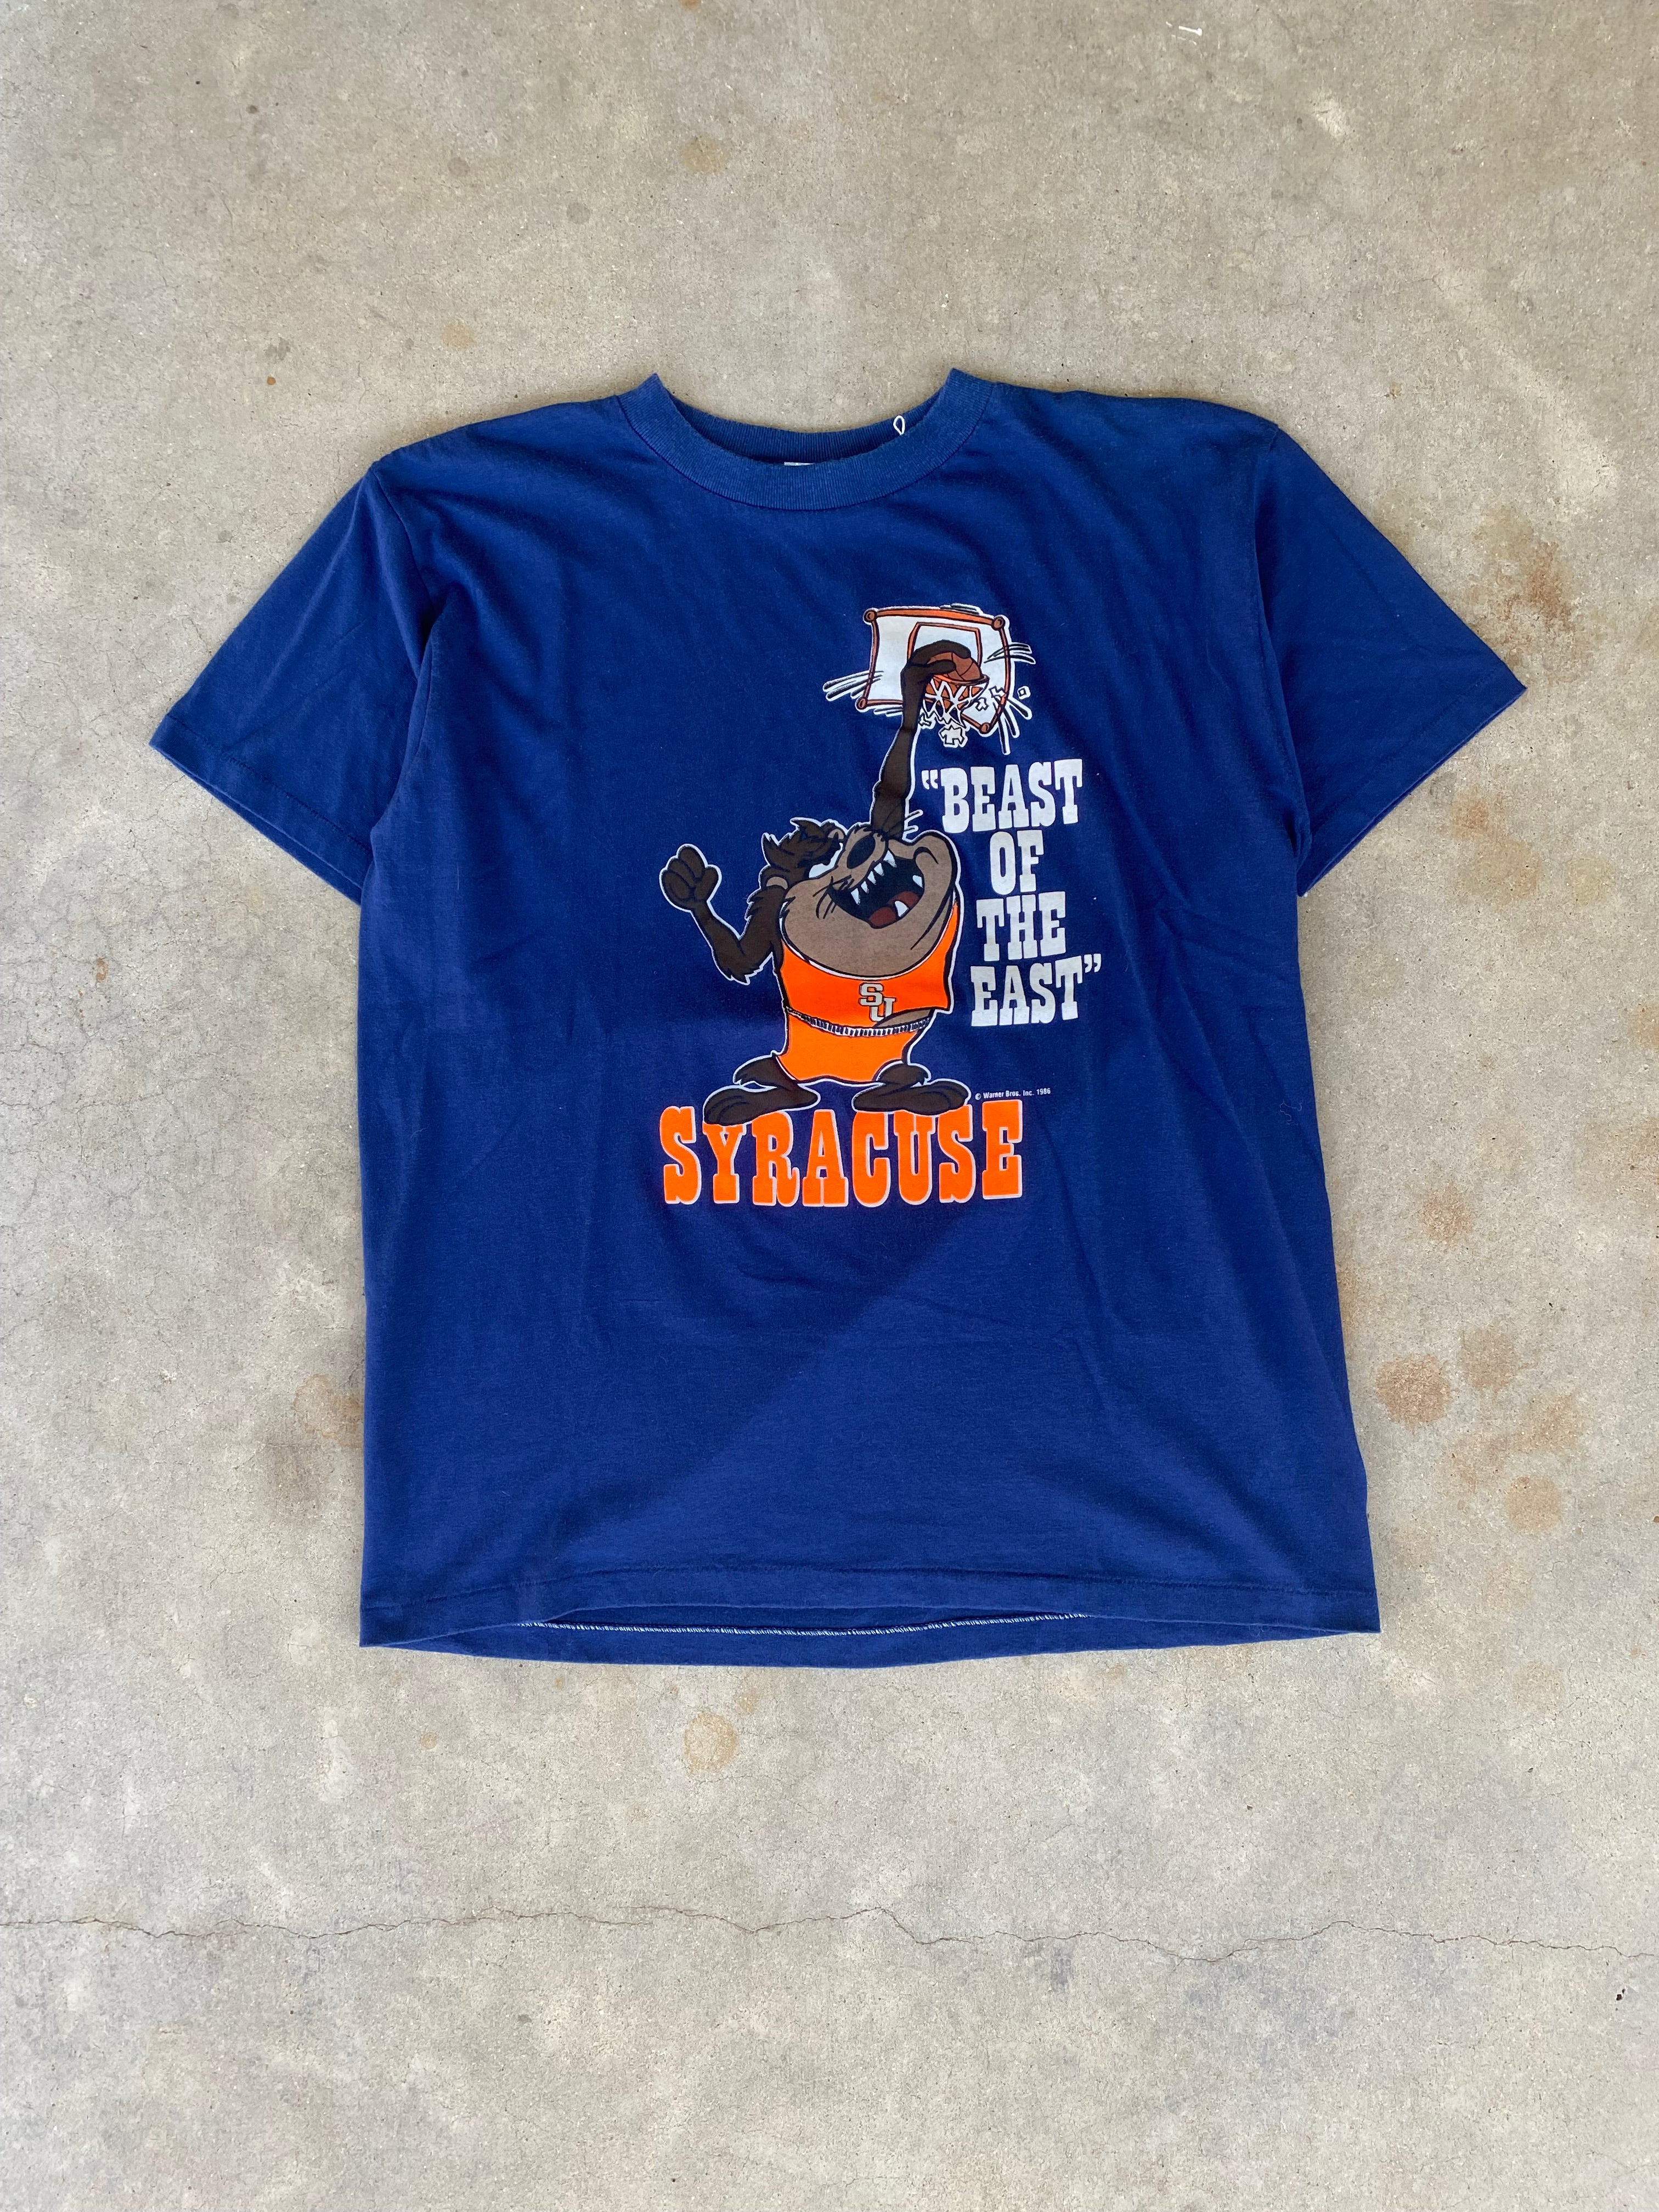 1986 Syracuse "Beast of the East" T-Shirt (M)